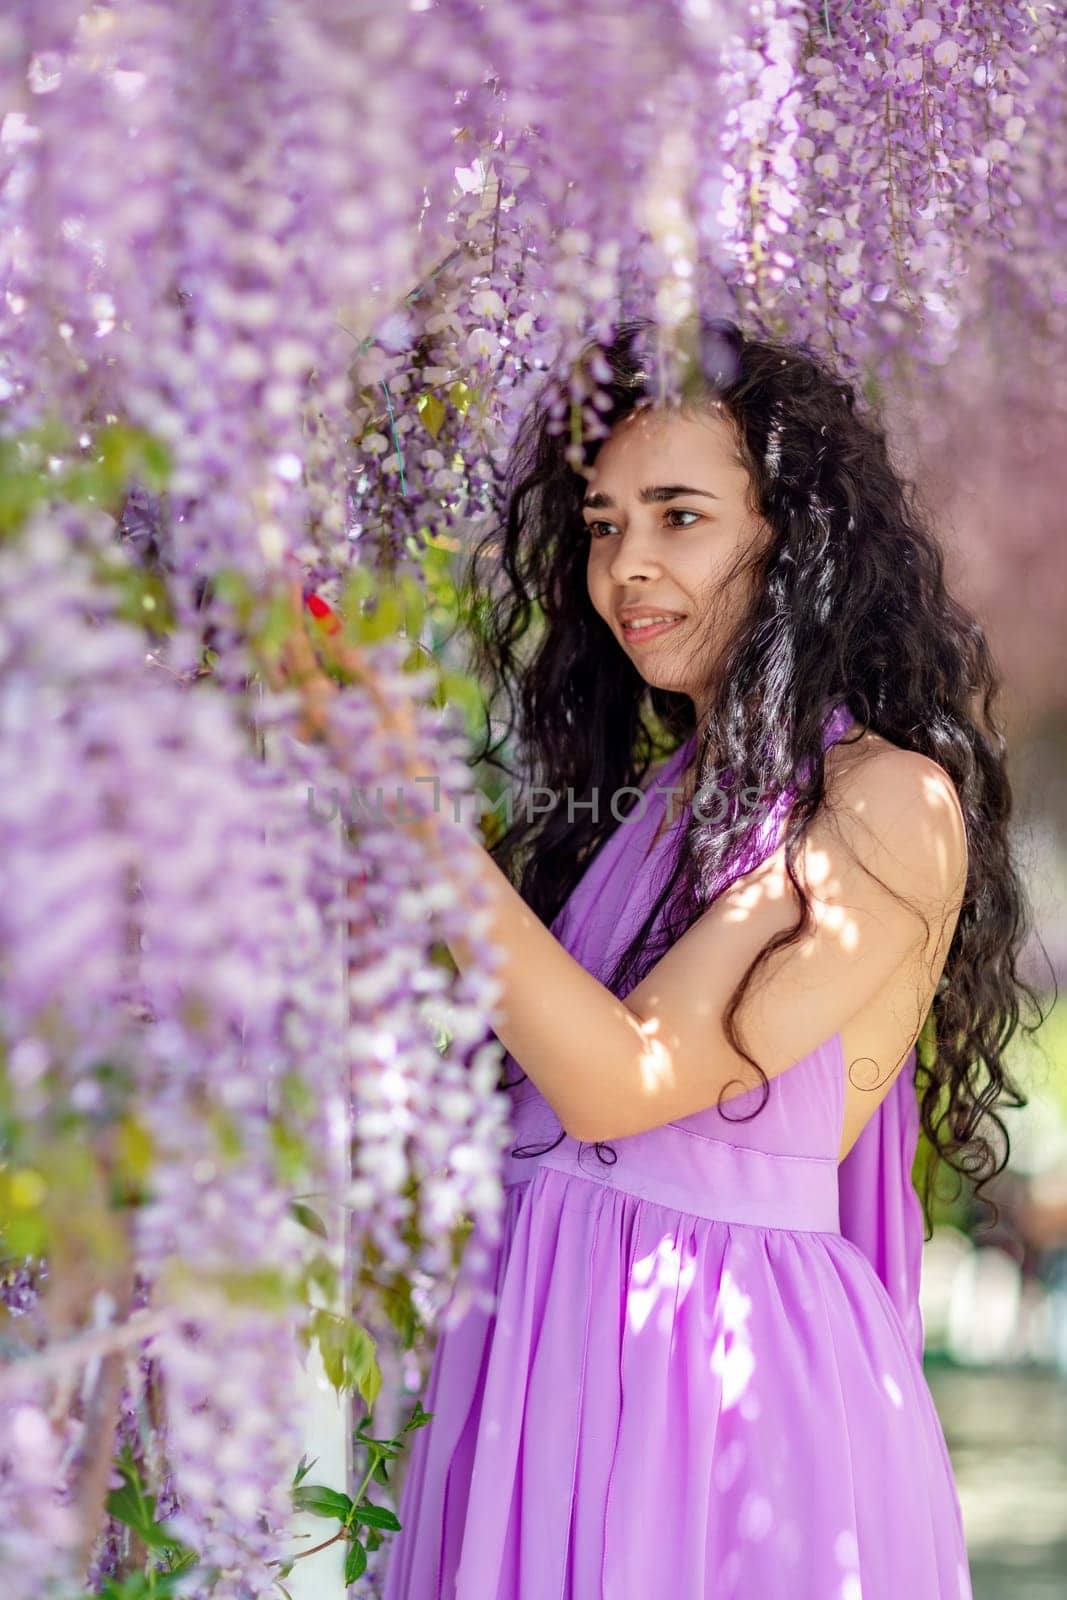 Woman wisteria lilac dress. Thoughtful happy mature woman in purple dress surrounded by chinese wisteria.